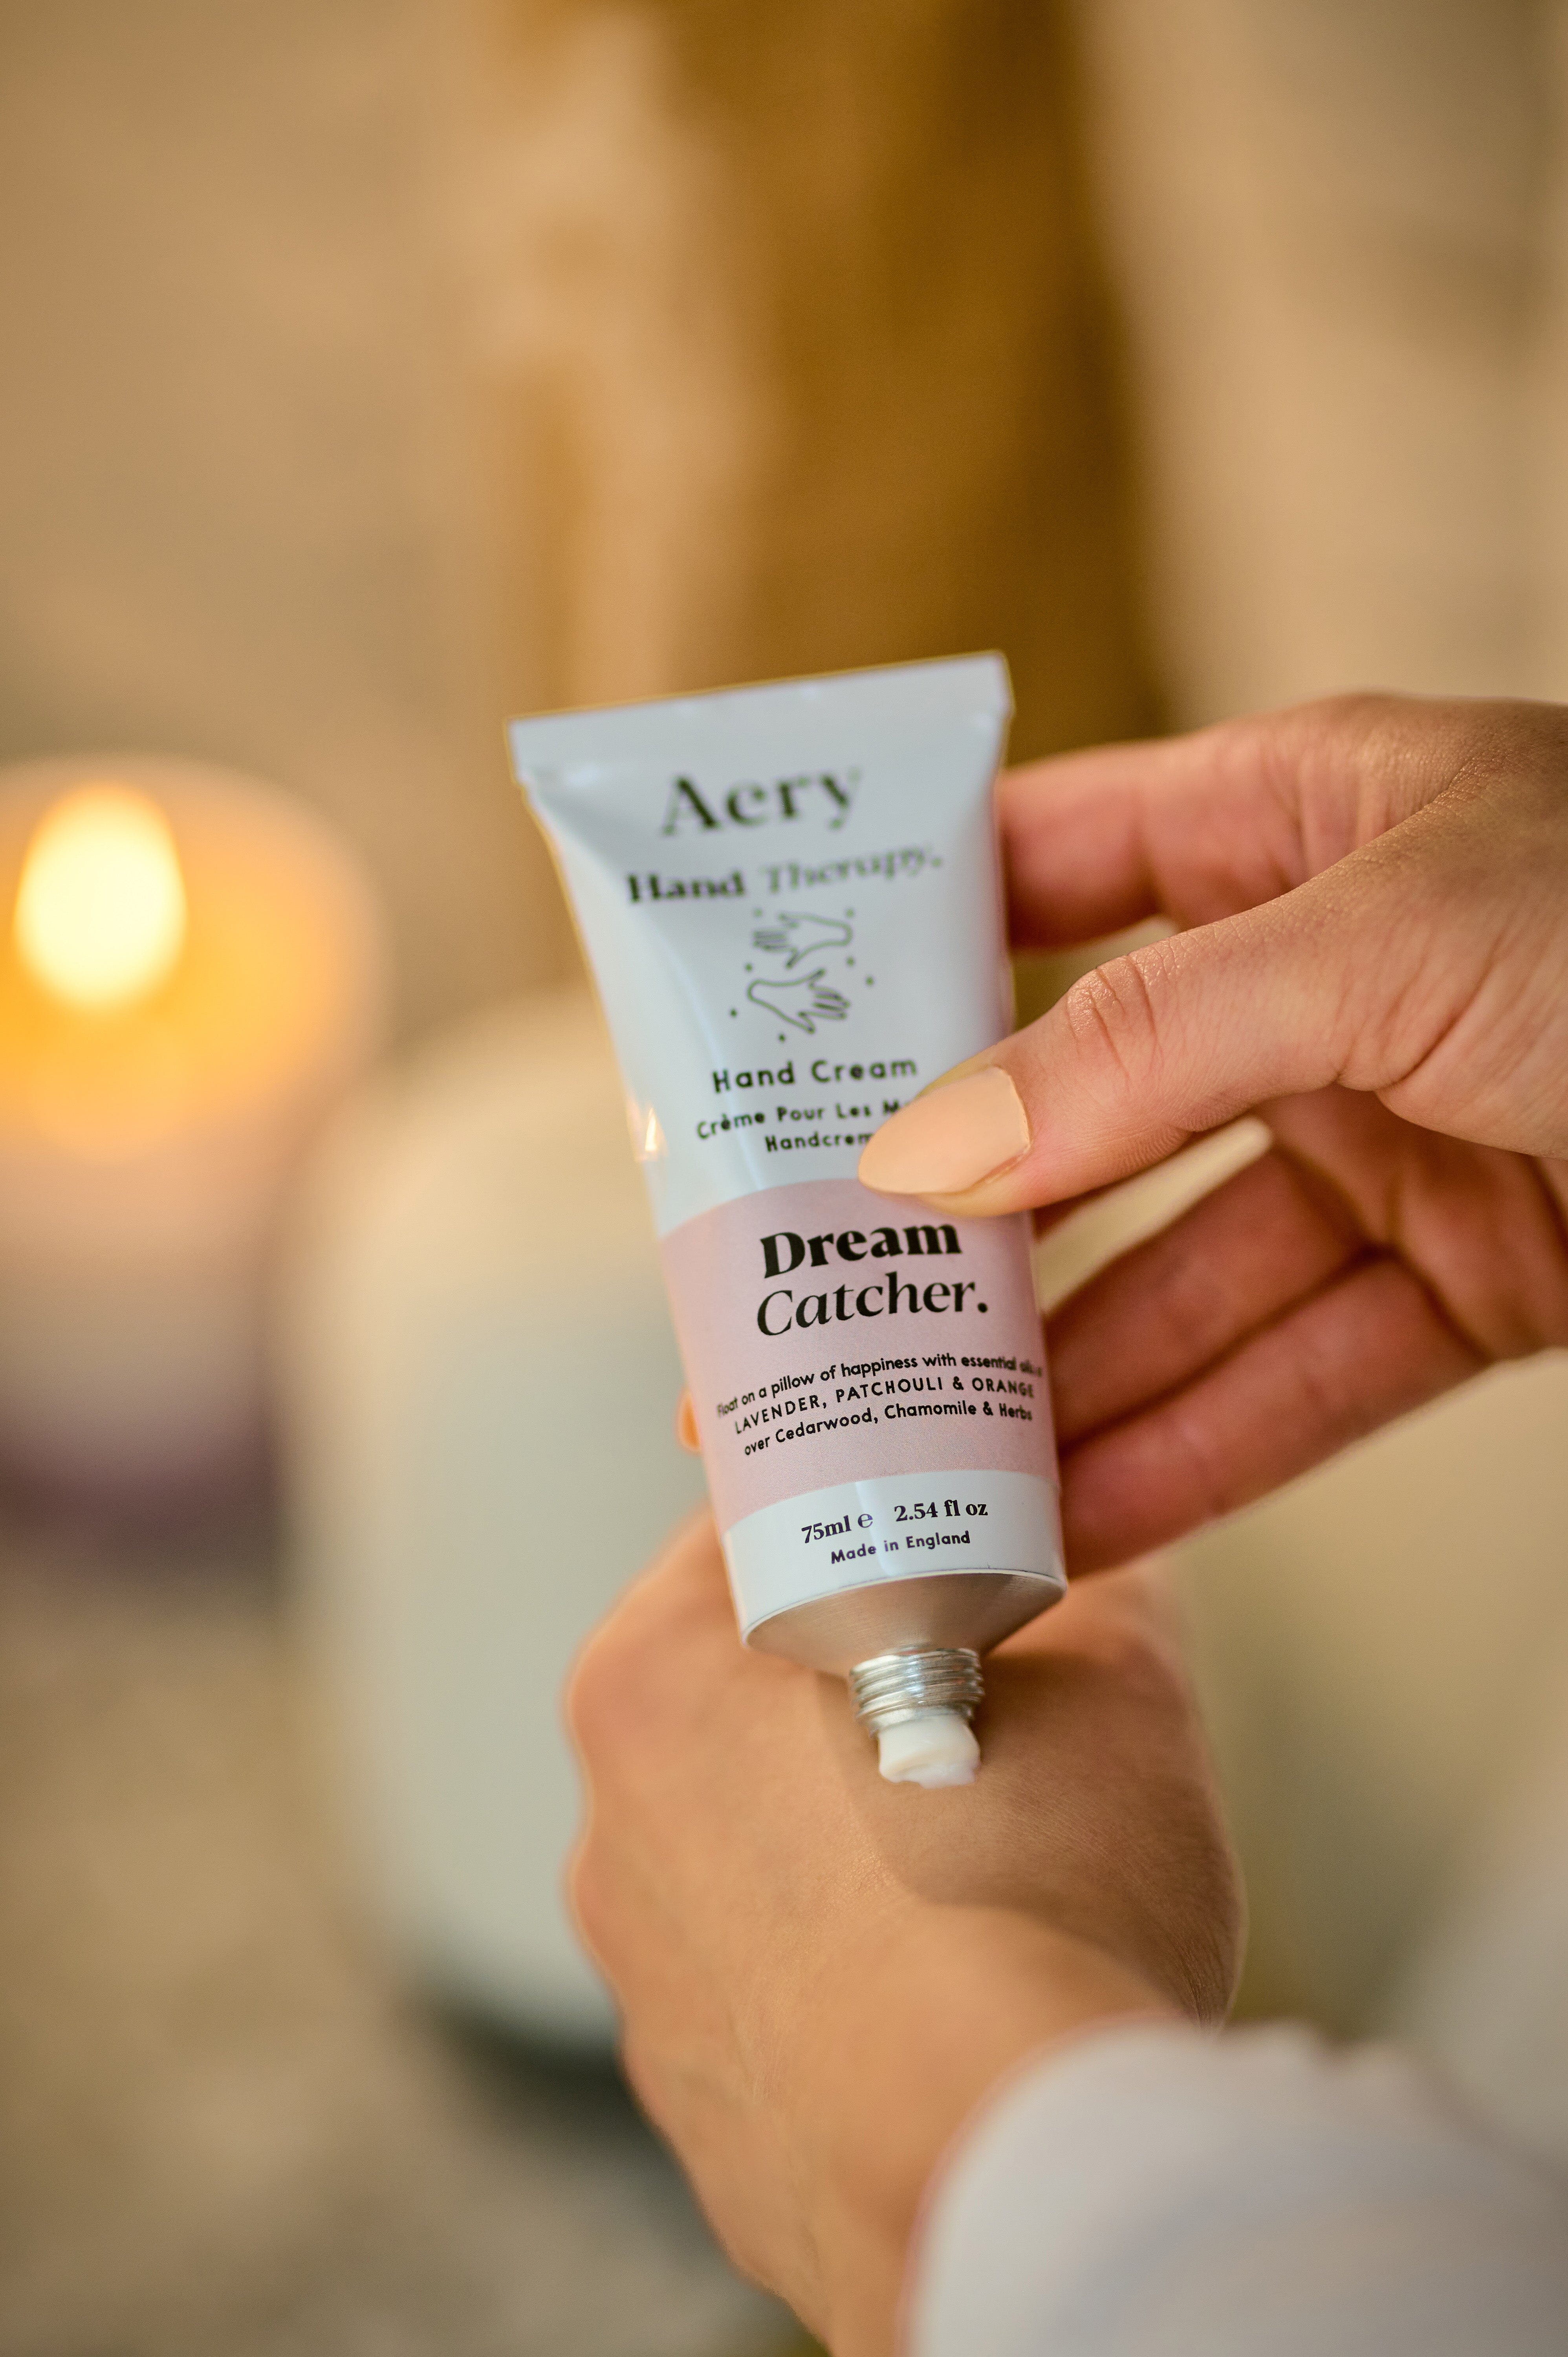 Lilac Dream Catcher hand cream by Aery displayed in hands 